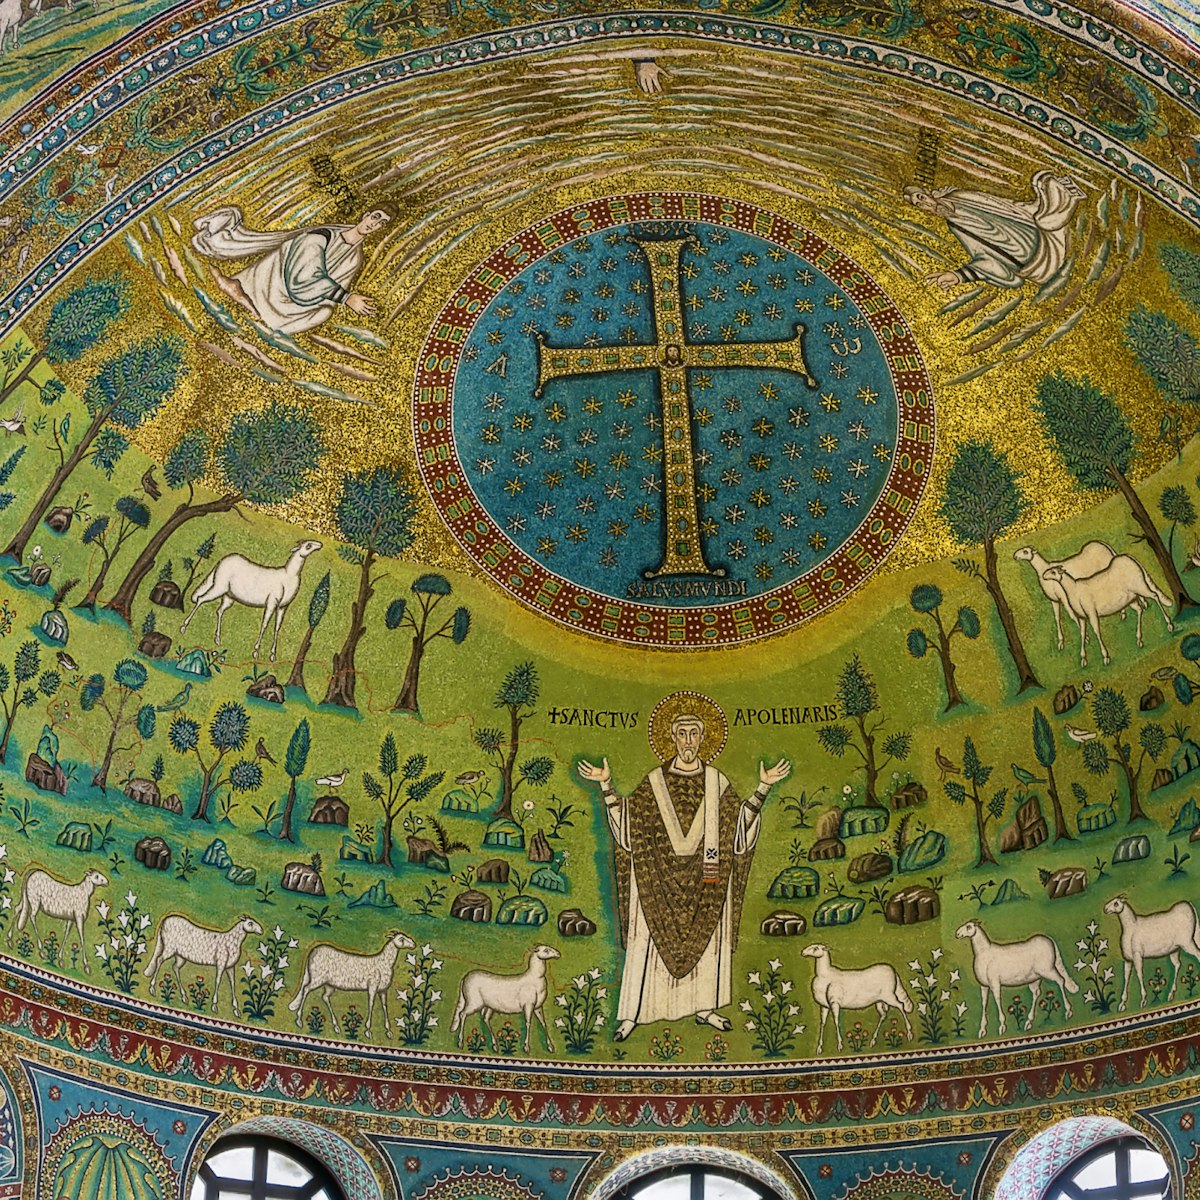 The Basilica of Sant' Apollinare in Classe is an important monument of Byzantine art near Ravenna, Italy. The apse is decorated with mosaics.